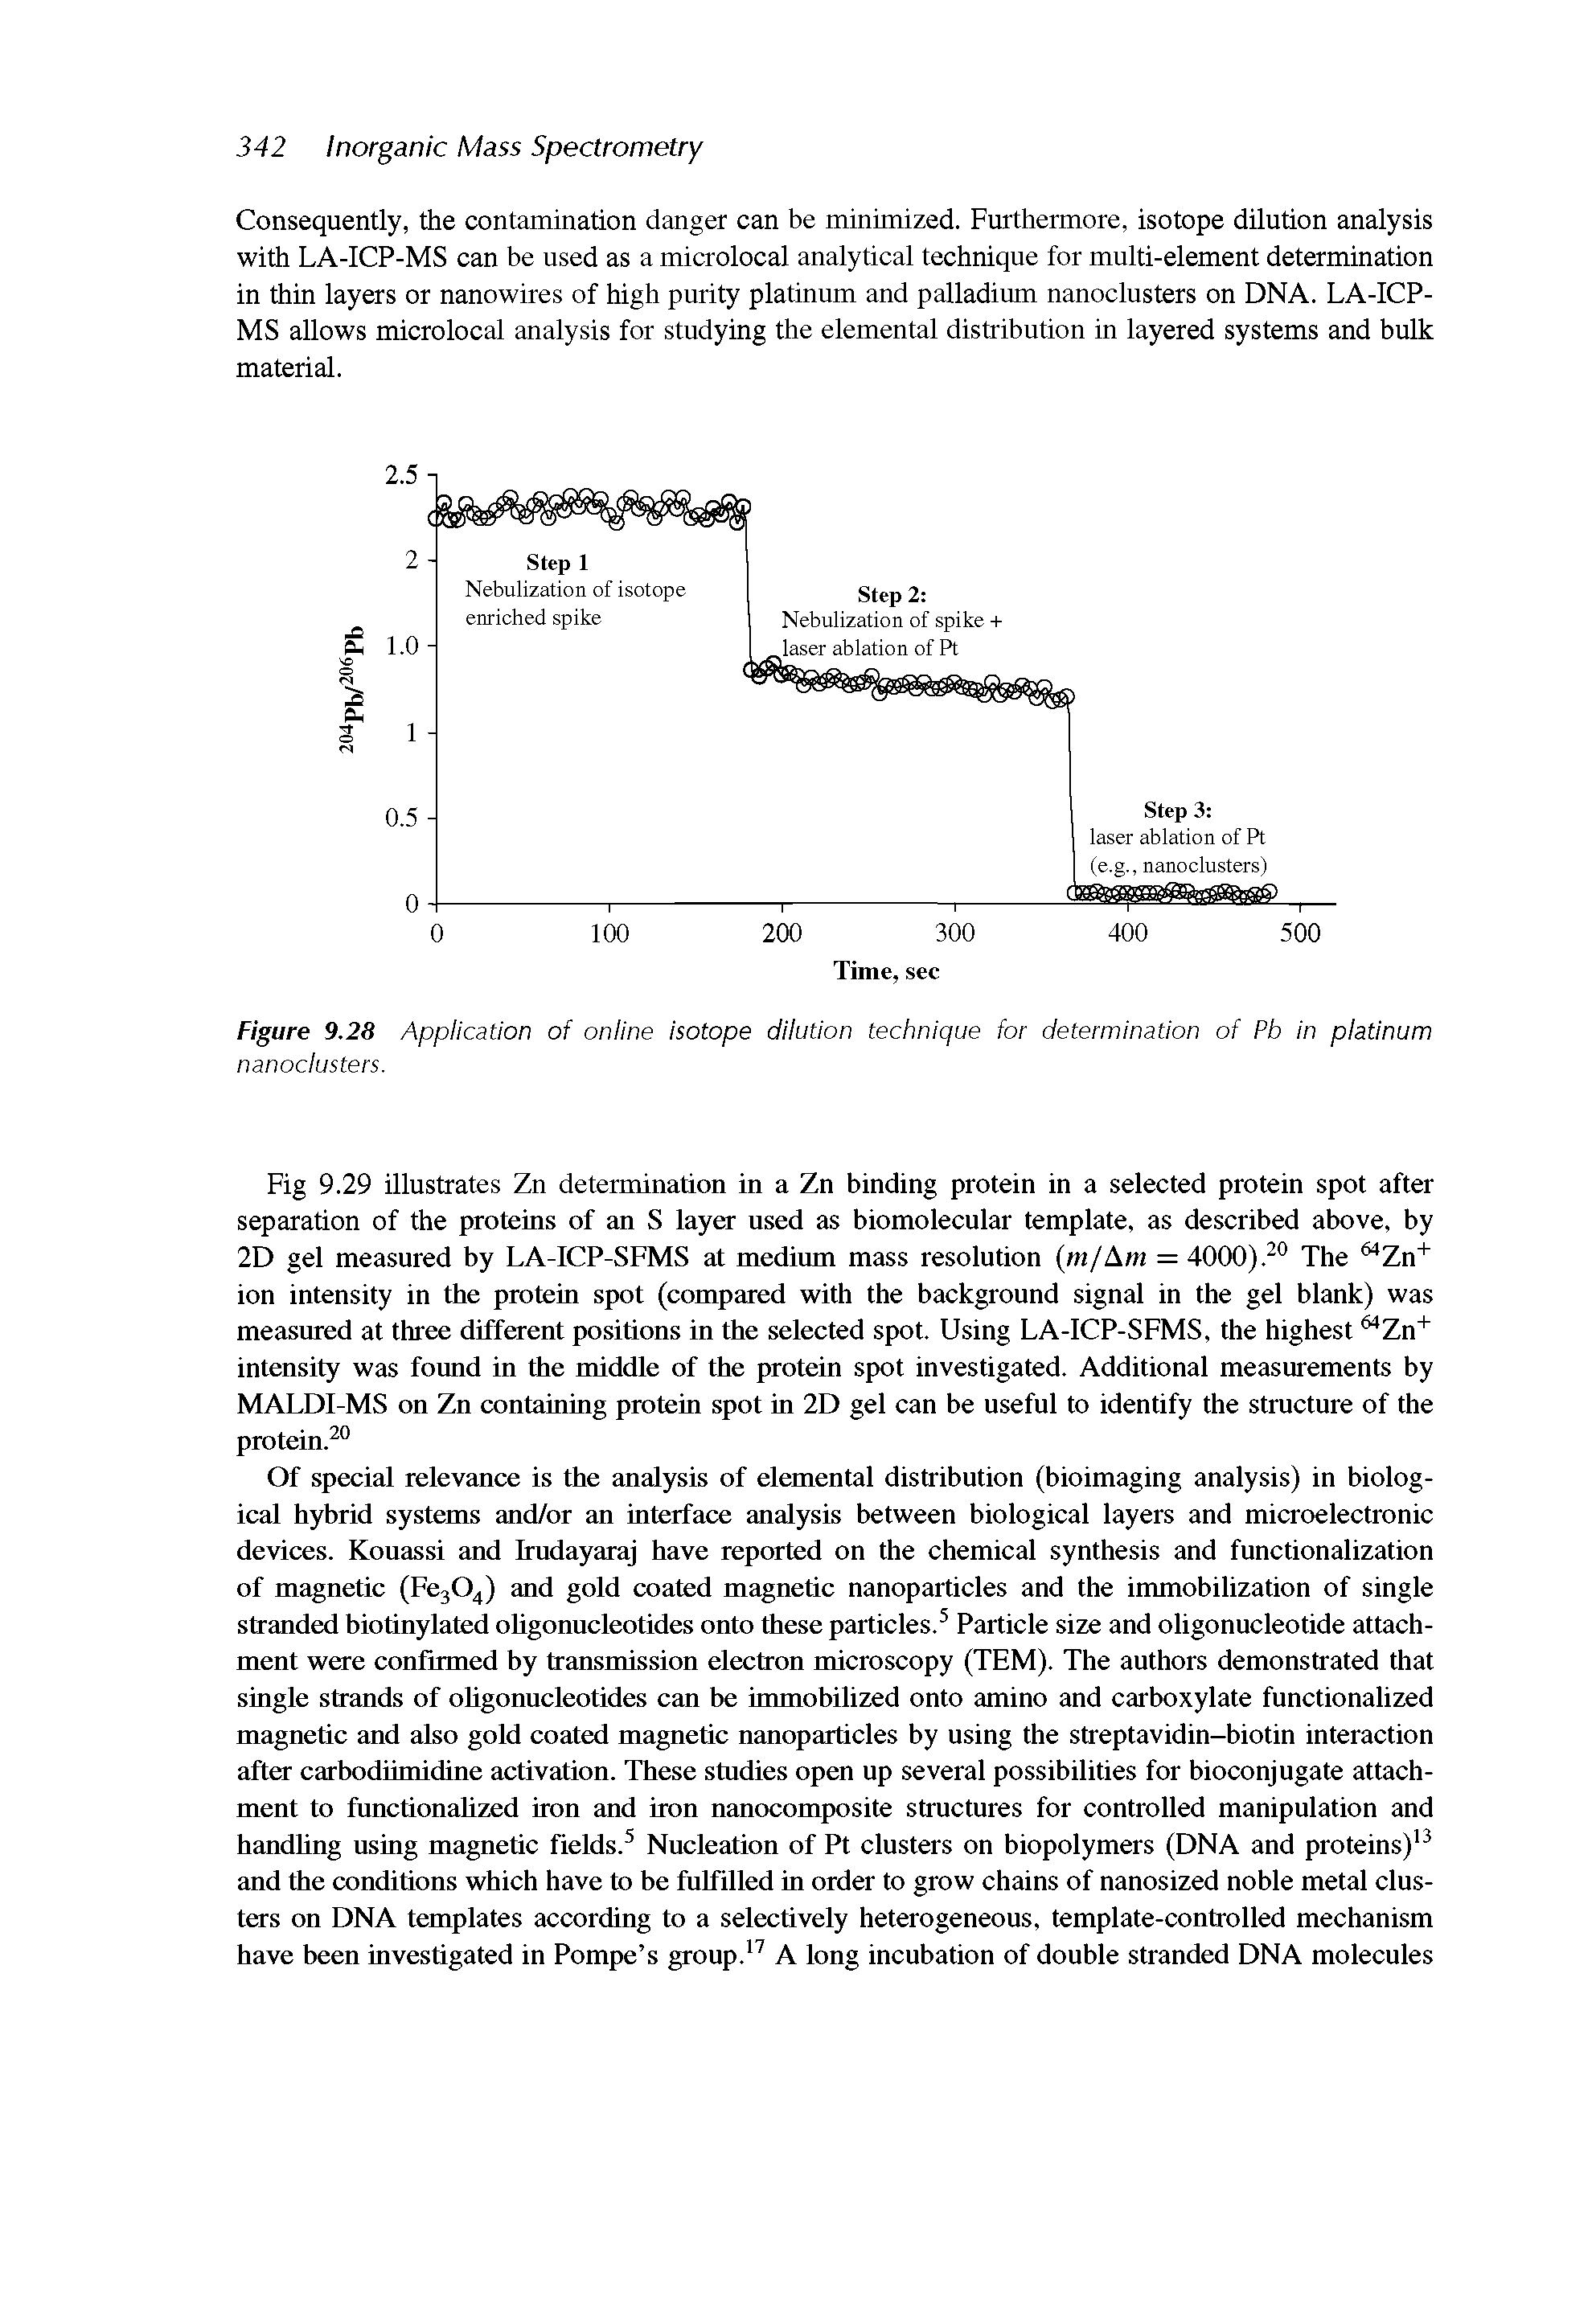 Figure 9.28 Application of online isotope dilution technique for determination of Pb in platinum nanoclusters.